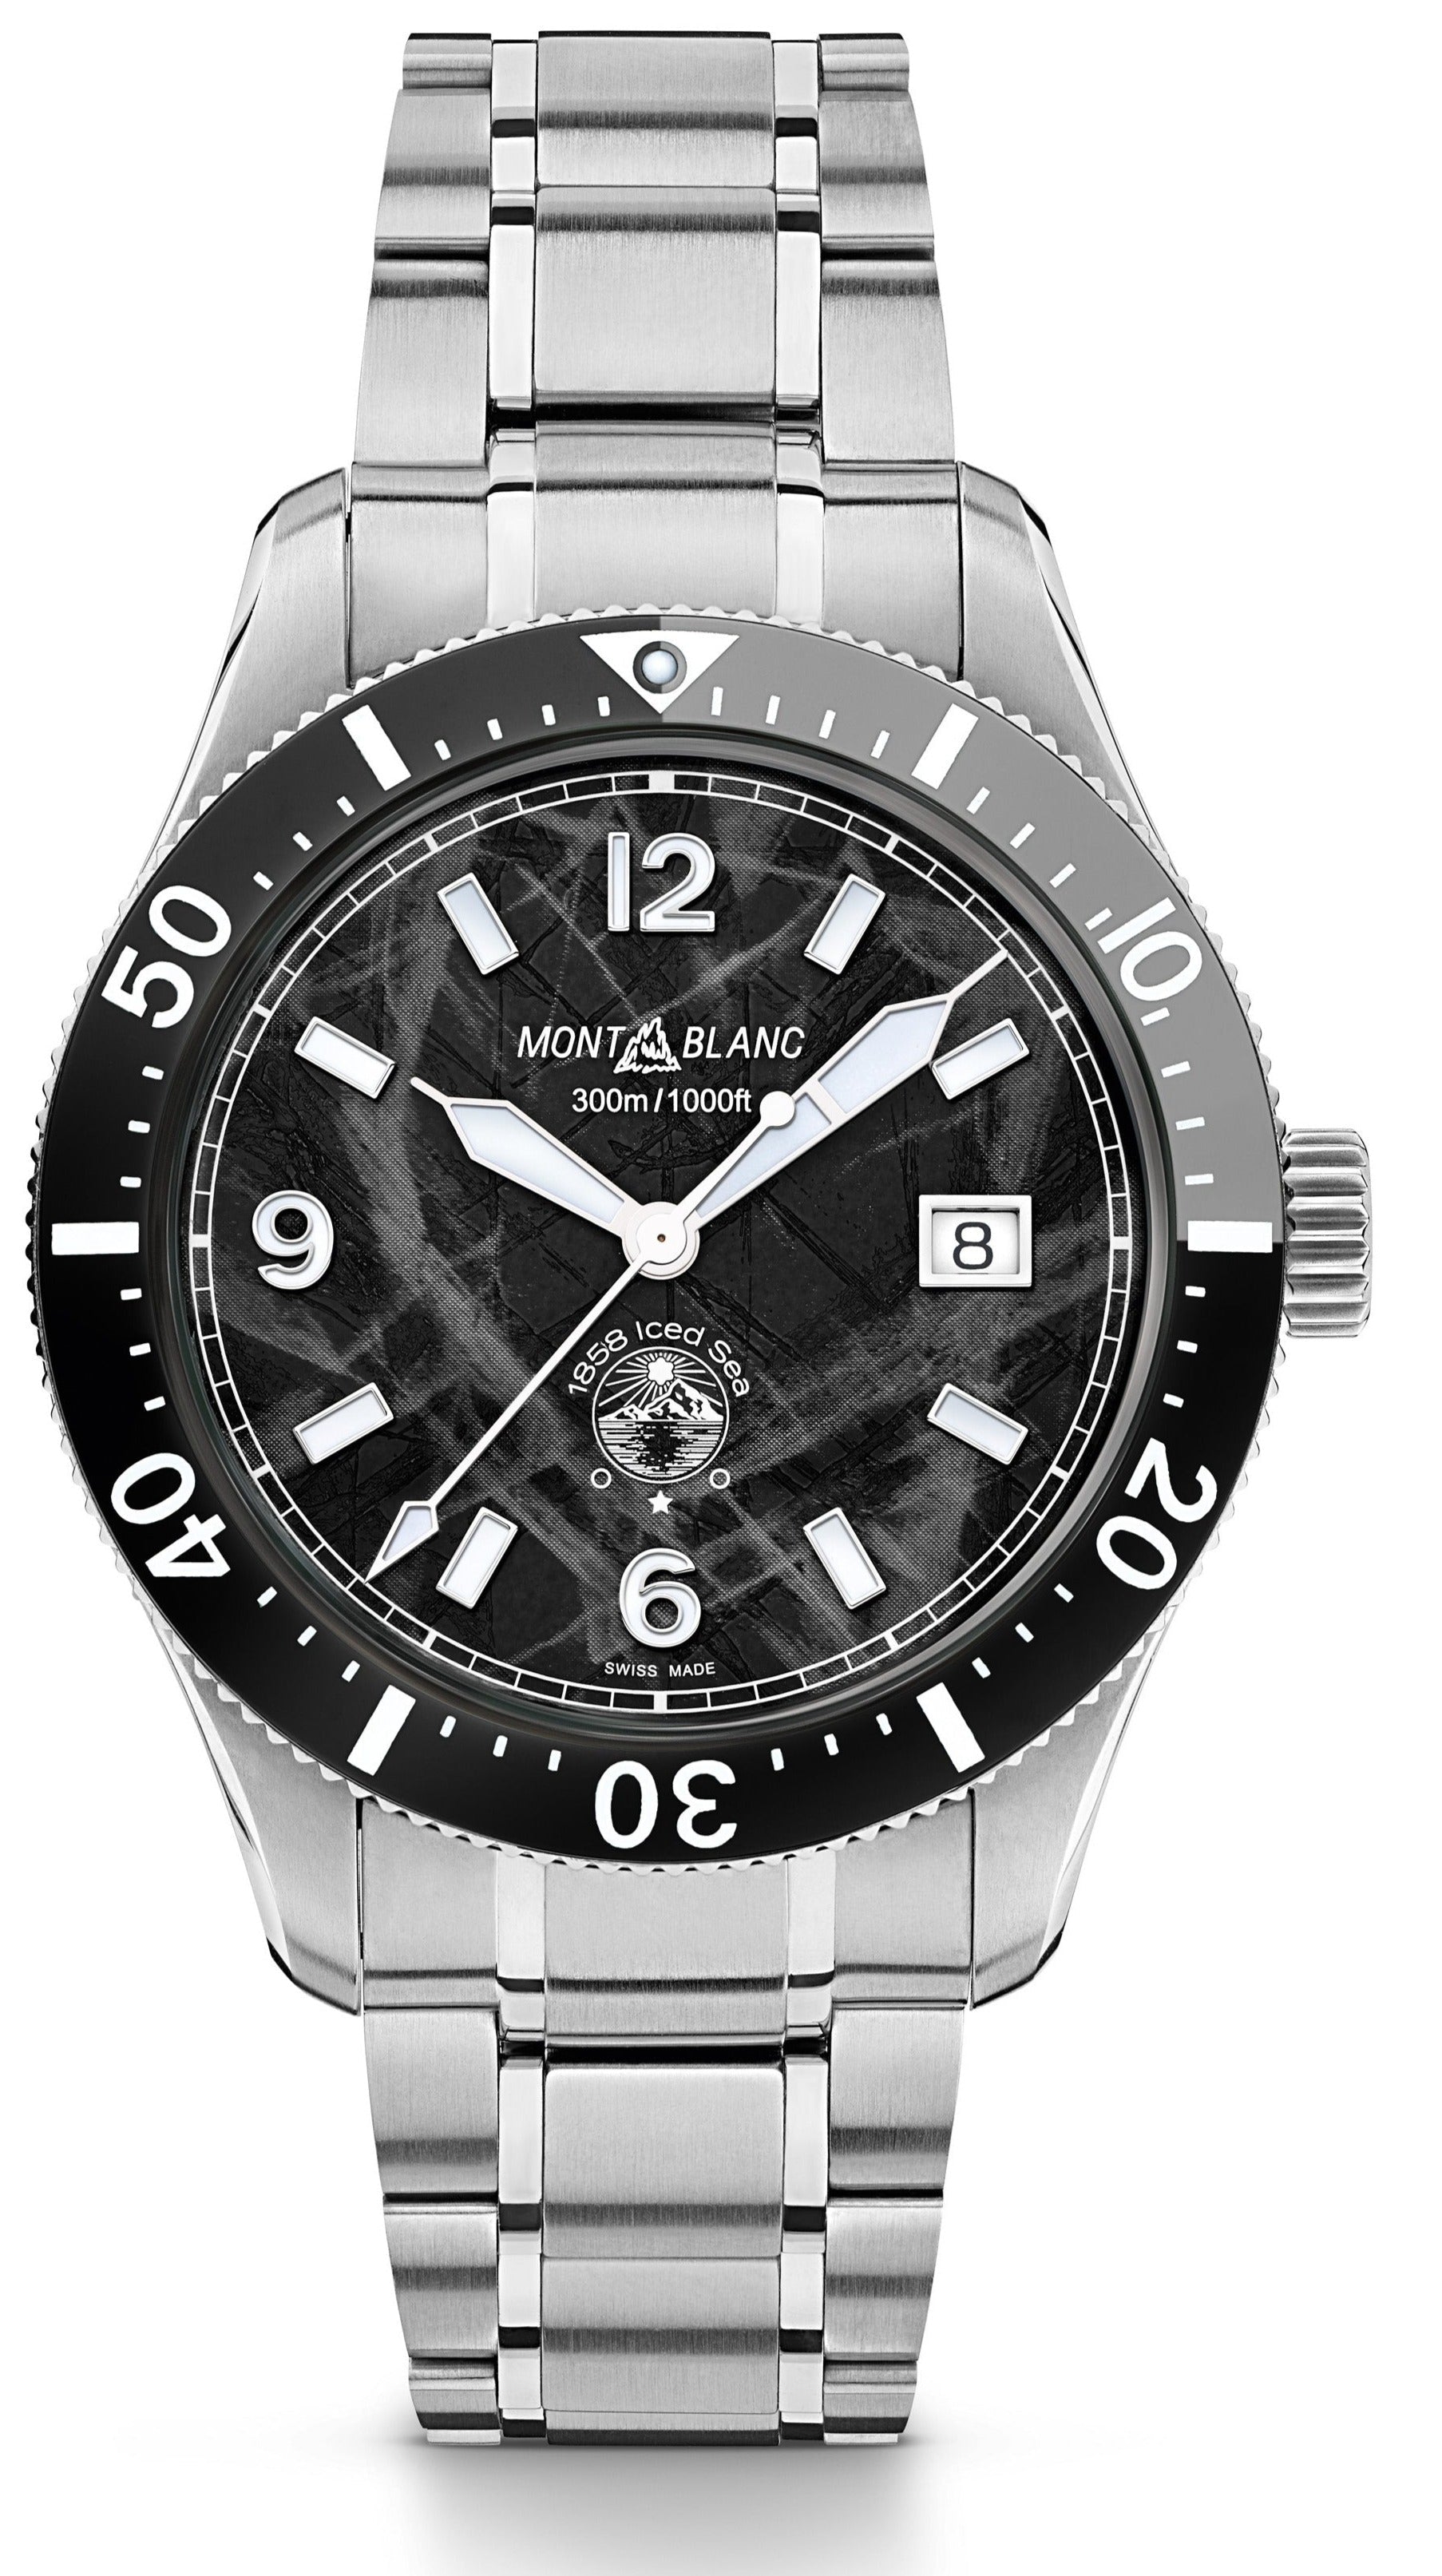 Photos - Wrist Watch Mont Blanc Montblanc Watch Iced Sea Automatic Date - Black MNTB-171 